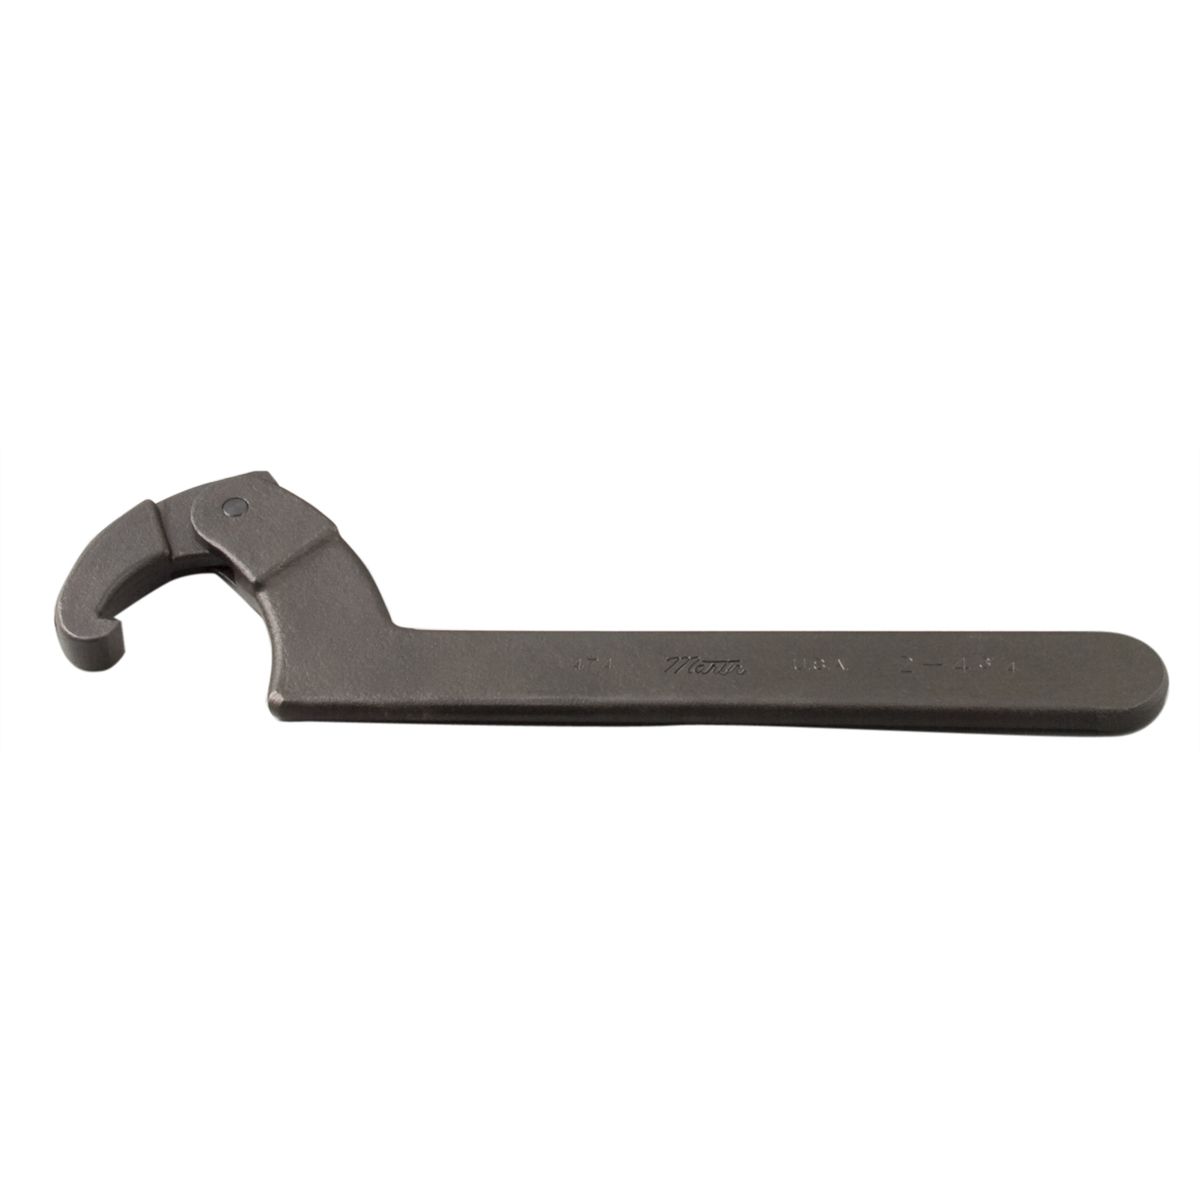 Adjustable Hook Spanner Wrench 2 to 4-3/4 Inch